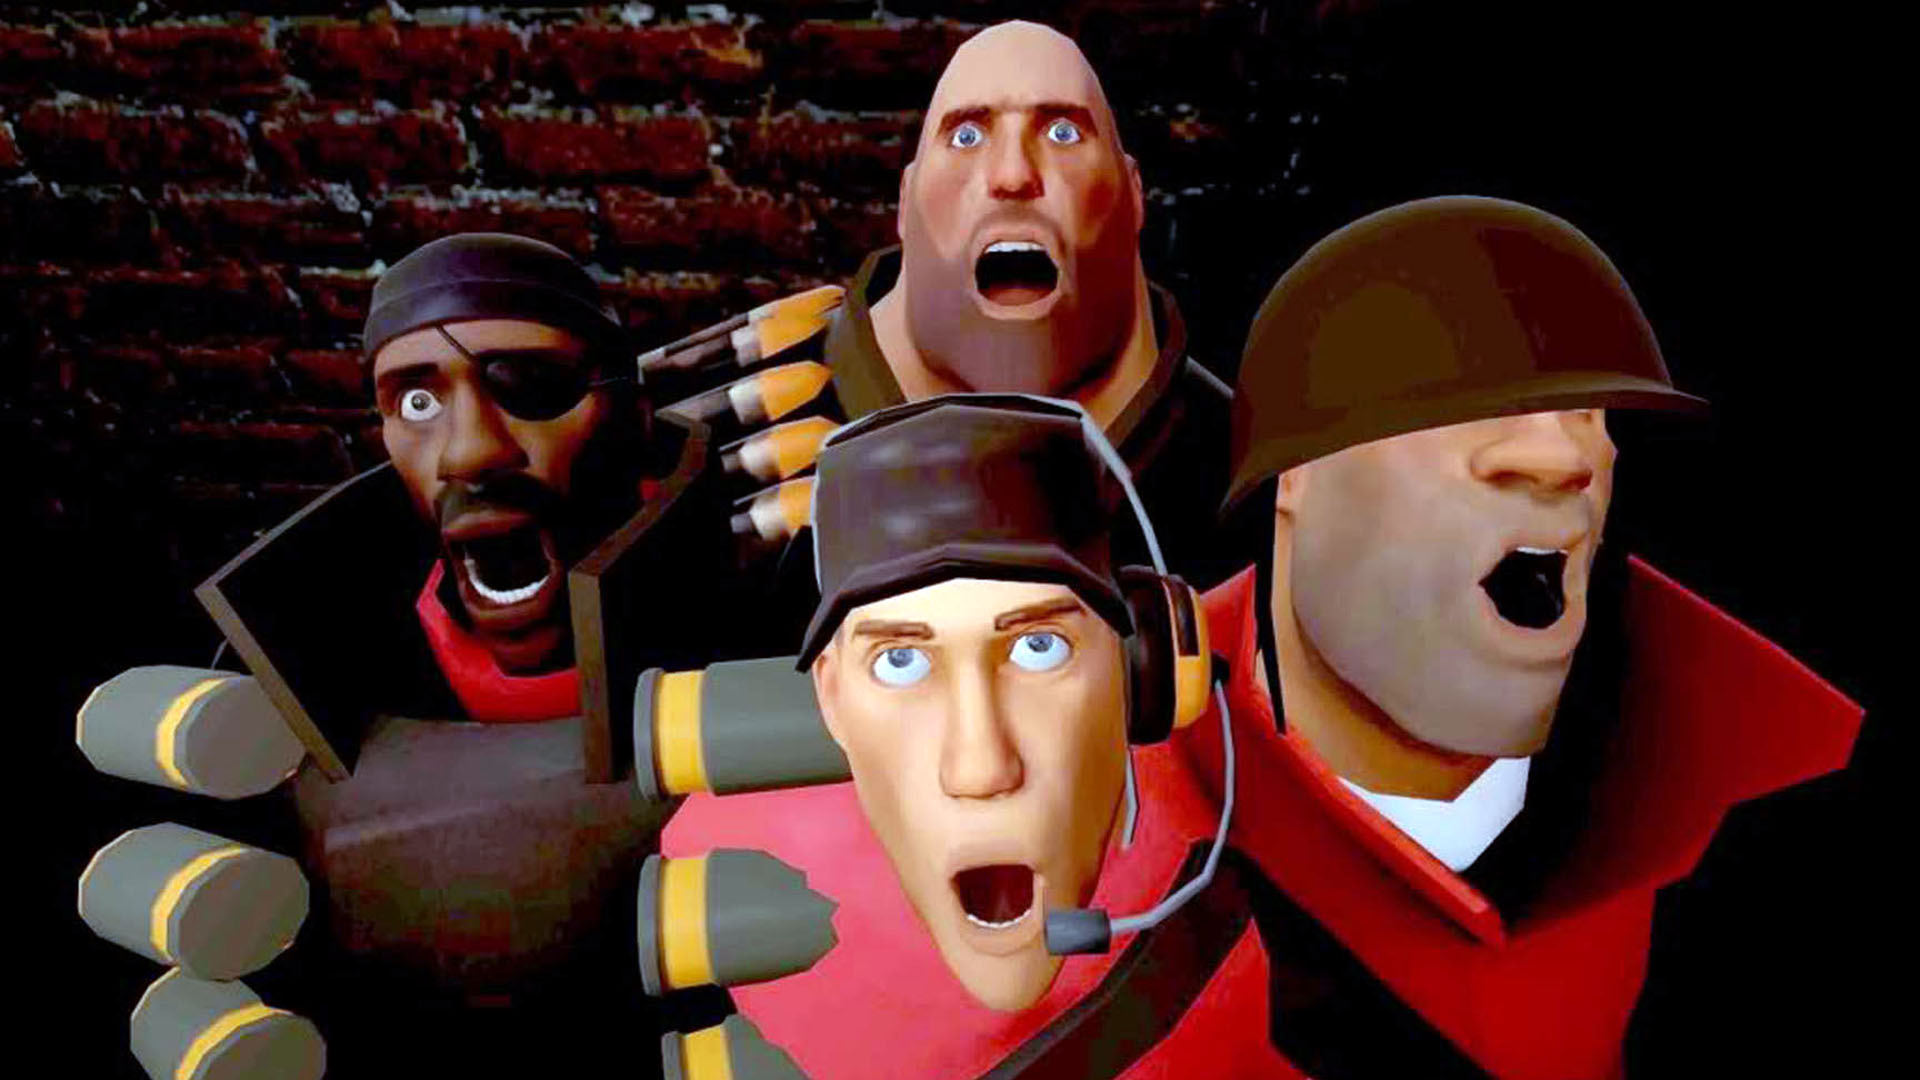 Valve is making TF2 modding easier by waiving a $50K fee